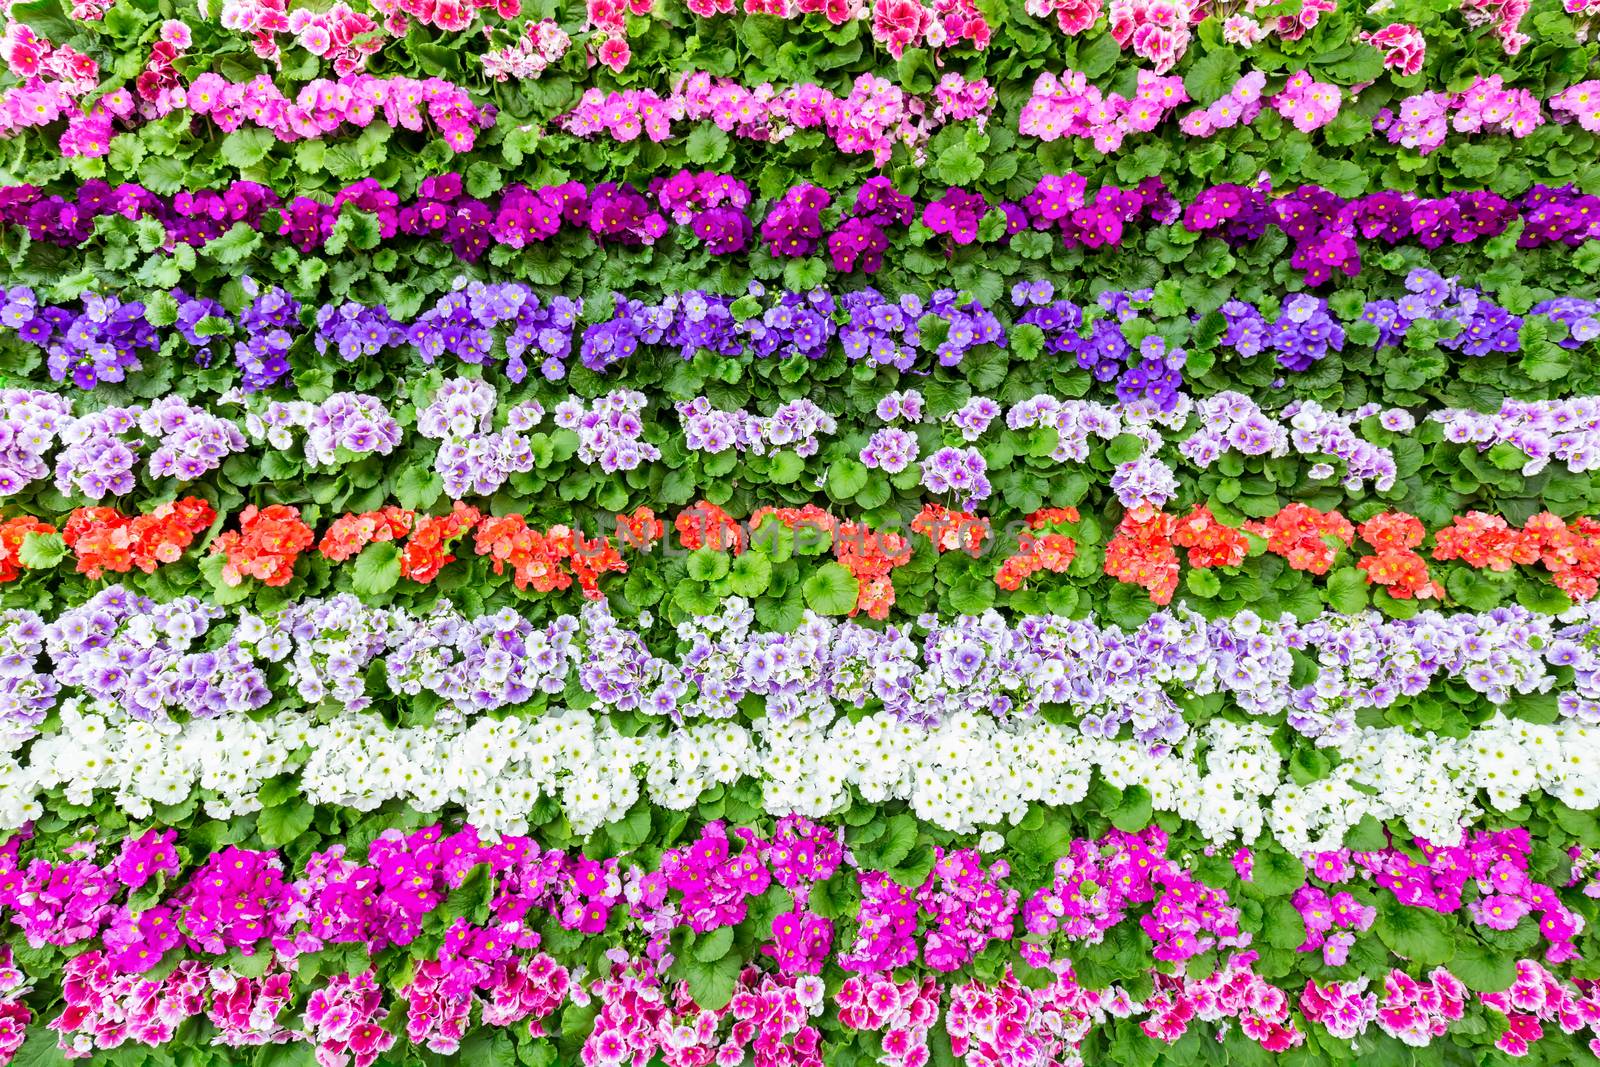 Horizontal rows of various colored flowers by BenSchonewille